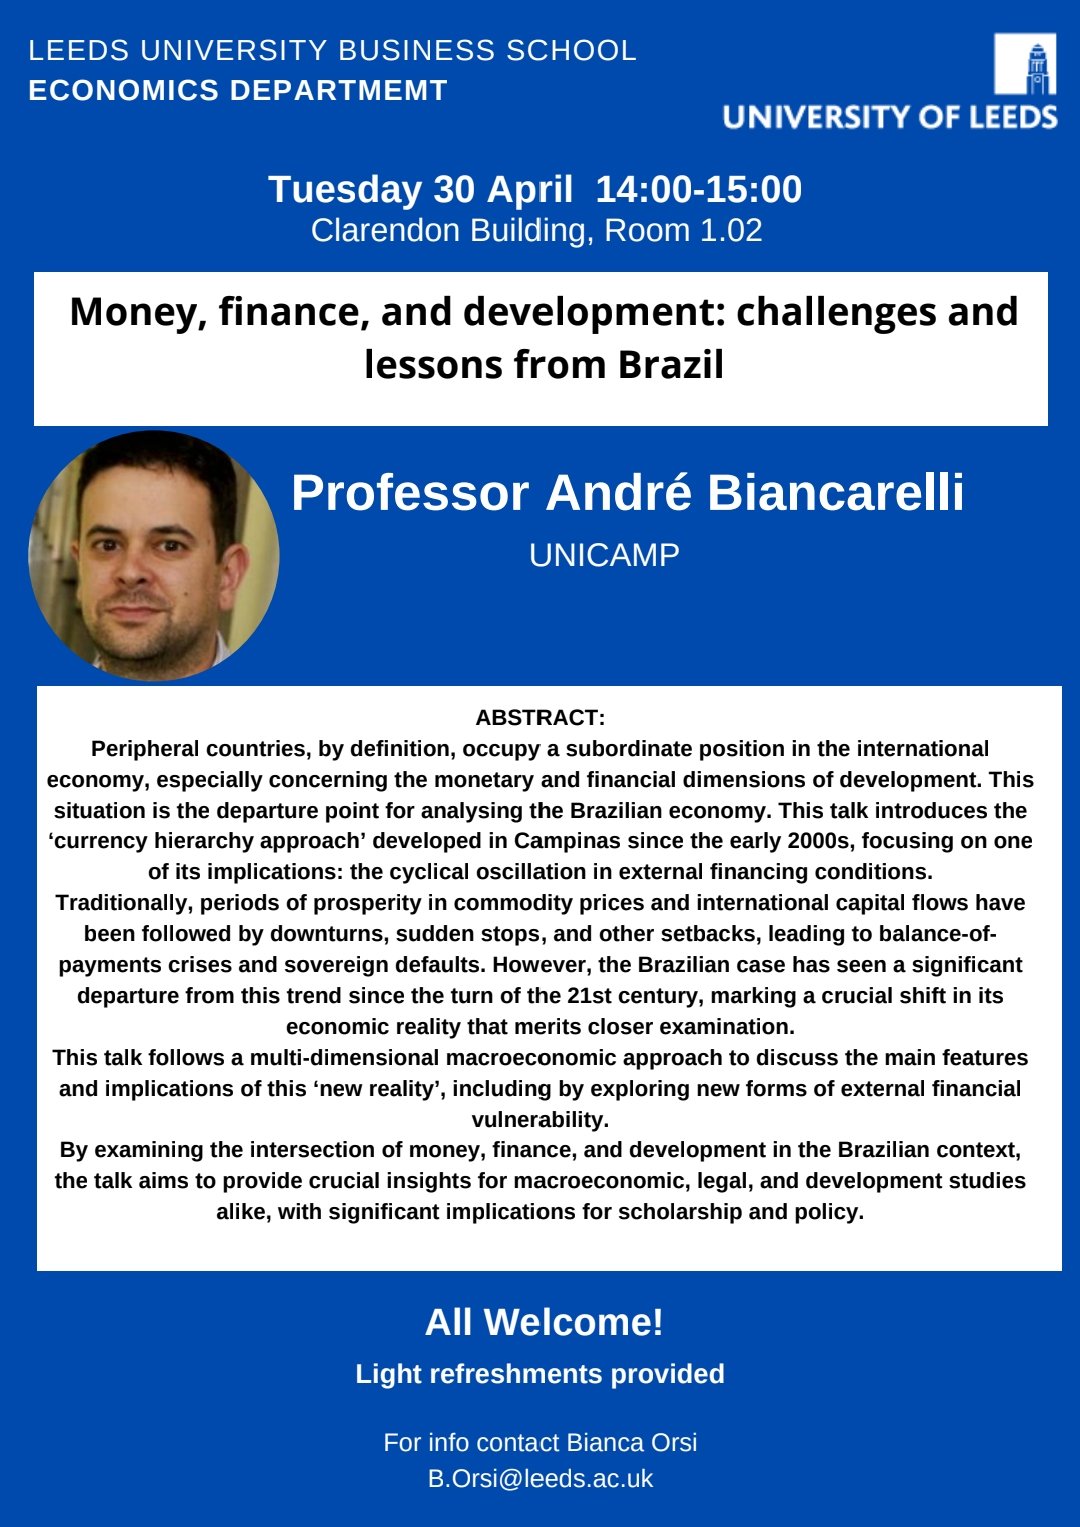 Research Seminar - Professor André Biancarelli, UNICAMP: Money, finance, and development: challenges and lessons from Brazil